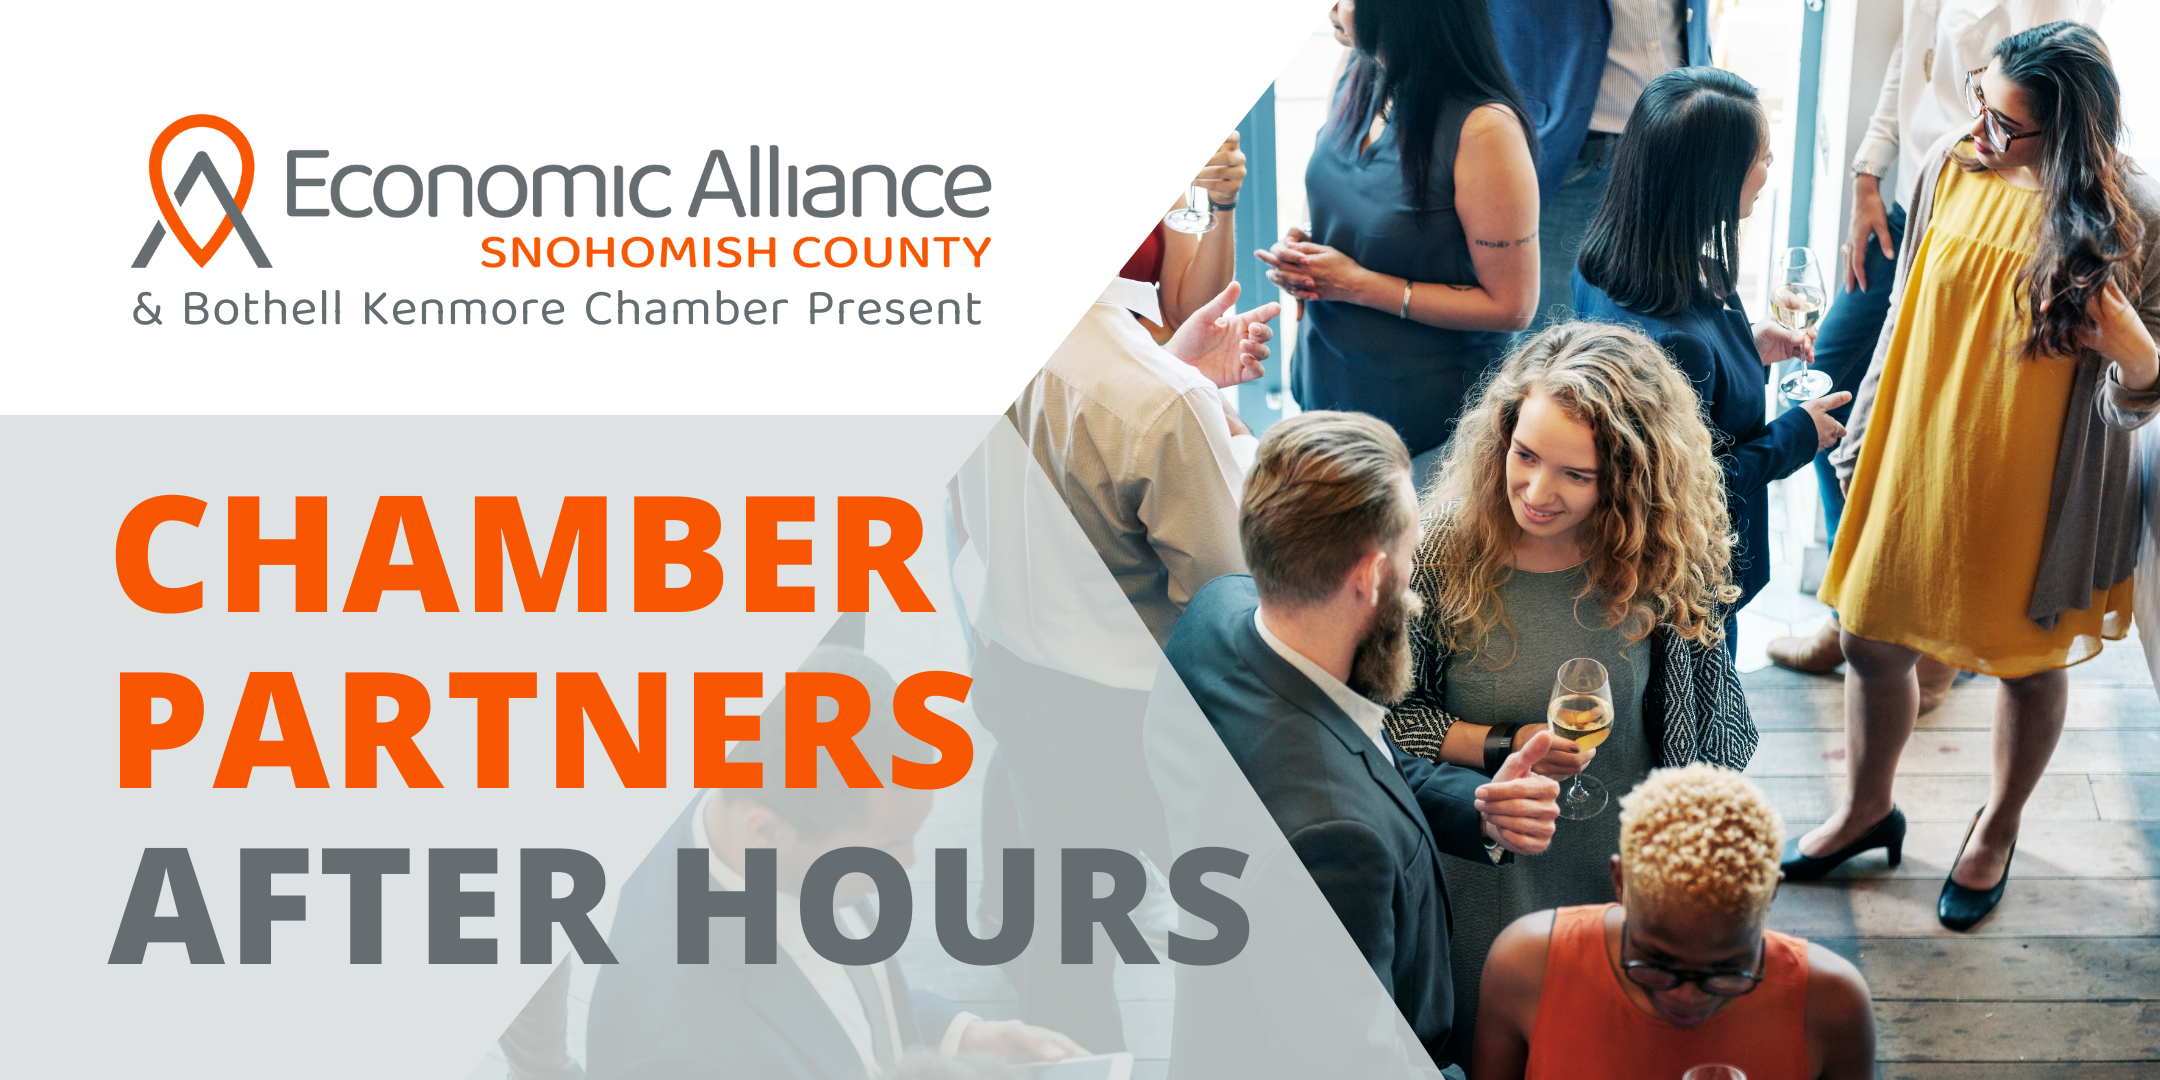 Event Promo Photo For Chamber Partners After Hours - Bothell Kenmore